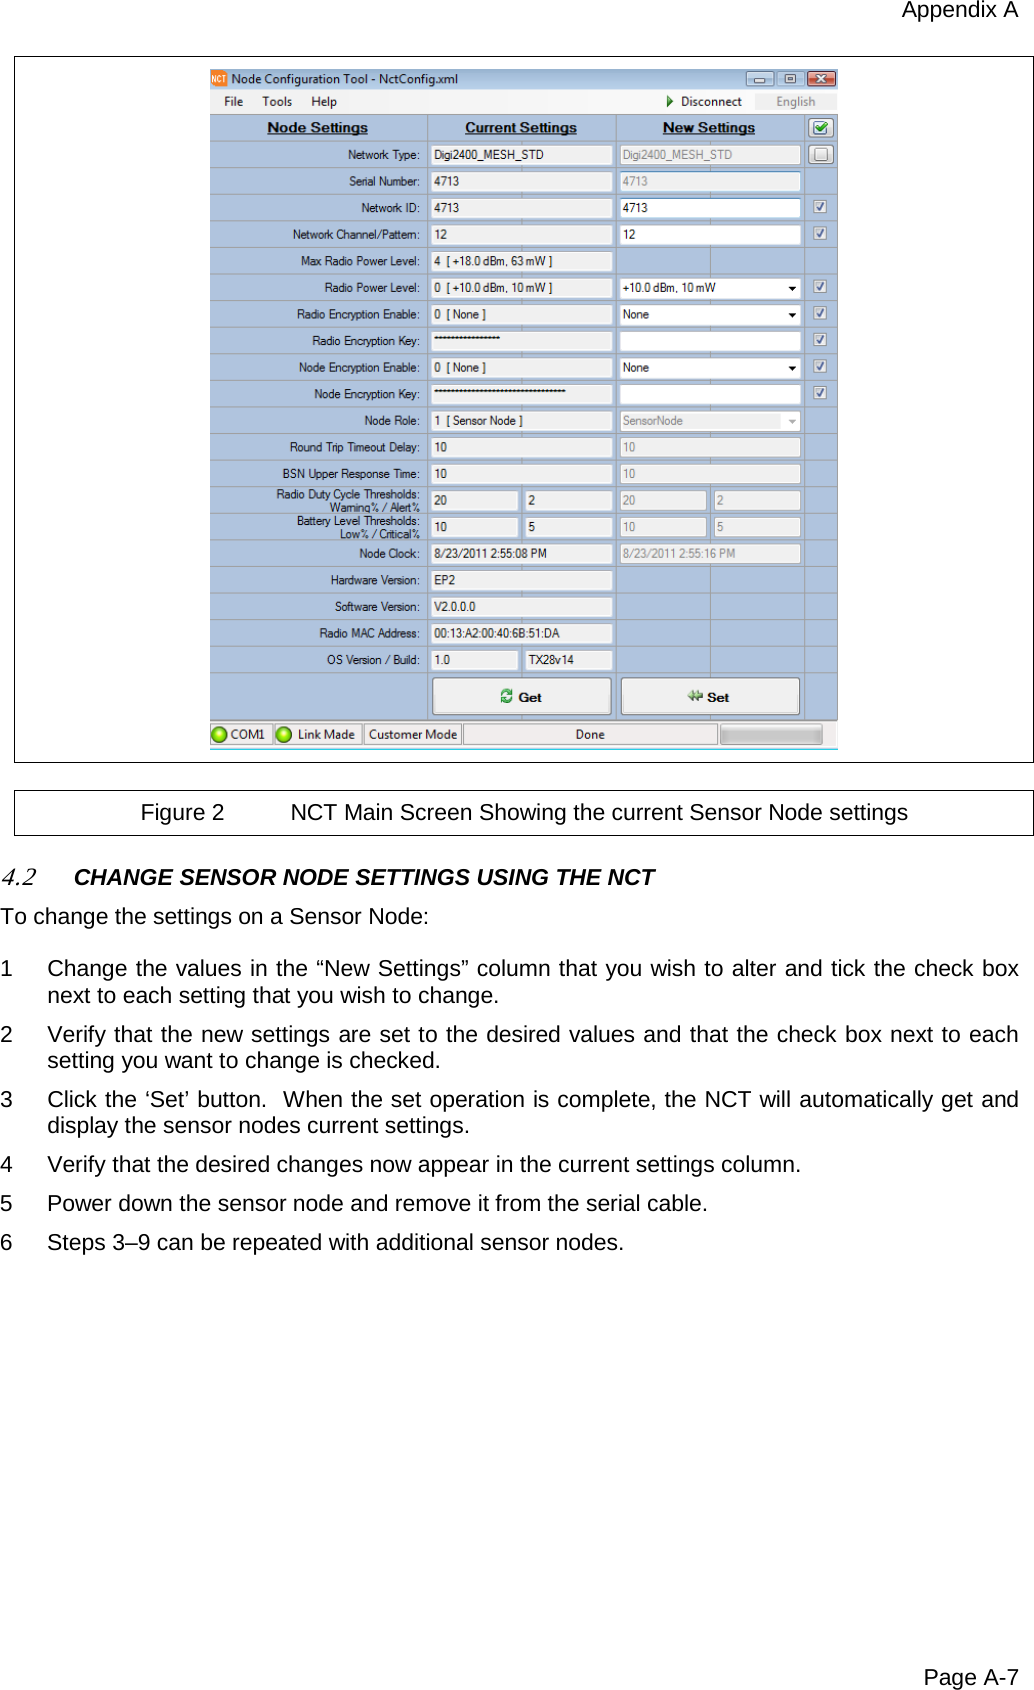 Appendix A Page A-7   Figure 2 NCT Main Screen Showing the current Sensor Node settings  4.2 CHANGE SENSOR NODE SETTINGS USING THE NCT  To change the settings on a Sensor Node:  1  Change the values in the “New Settings” column that you wish to alter and tick the check box next to each setting that you wish to change. 2  Verify that the new settings are set to the desired values and that the check box next to each setting you want to change is checked. 3  Click the ‘Set’ button.  When the set operation is complete, the NCT will automatically get and display the sensor nodes current settings. 4  Verify that the desired changes now appear in the current settings column. 5  Power down the sensor node and remove it from the serial cable. 6  Steps 3–9 can be repeated with additional sensor nodes.  